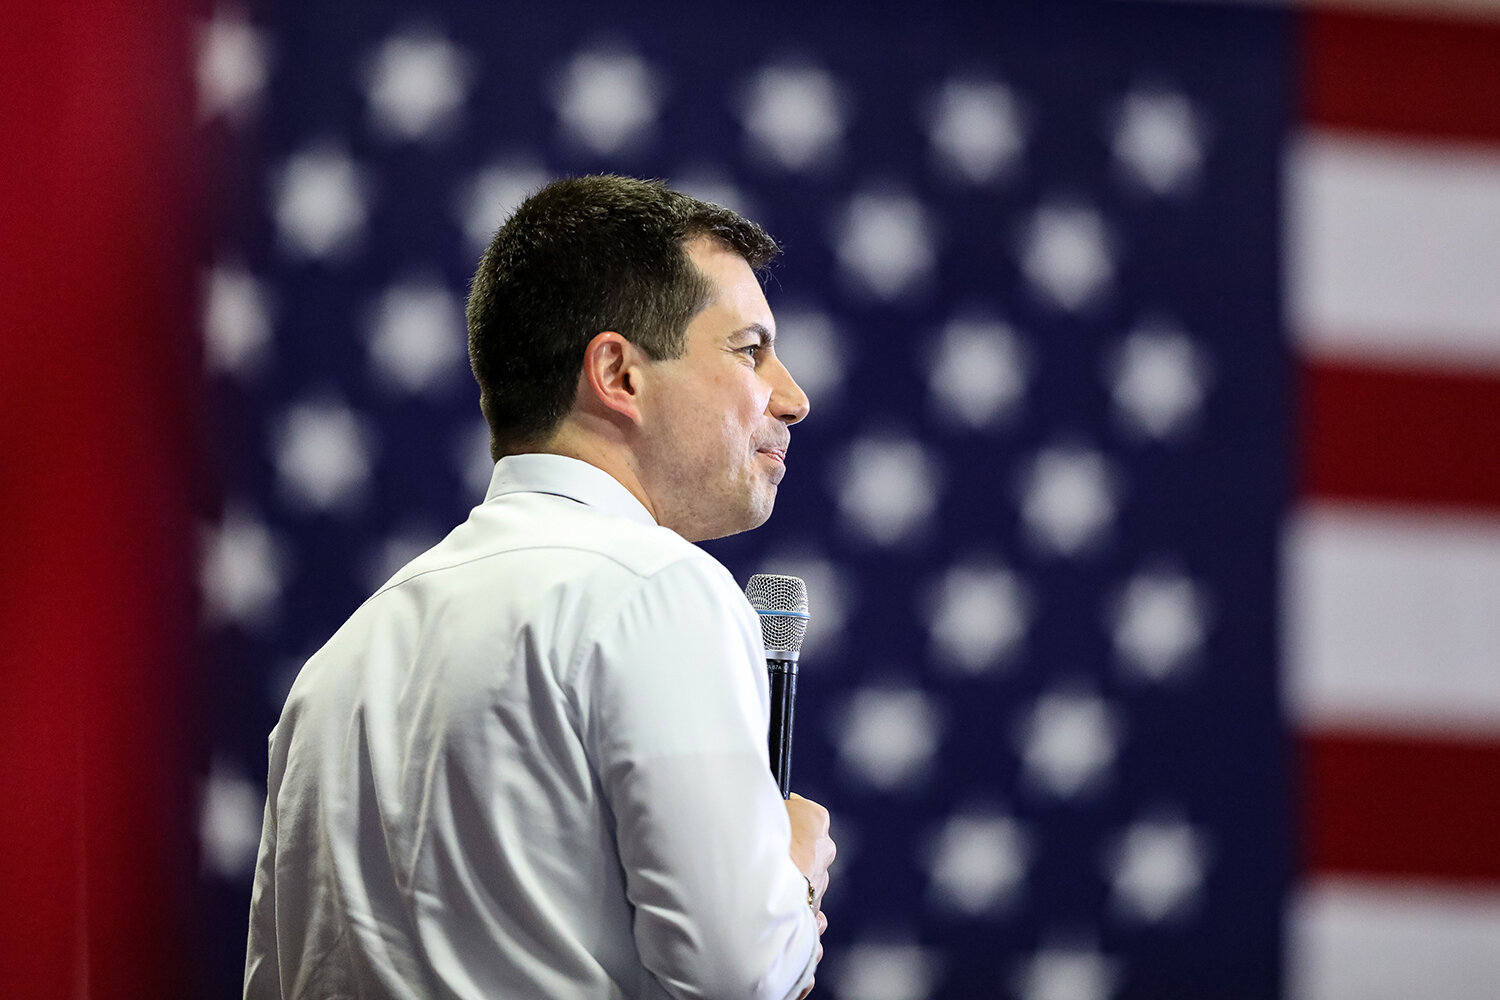  Democratic Presidential hopeful Pete Buttigieg addresses supporters during a campaign rally at Northwest Junior High in Coralville, IA on Sunday, Feb. 2, 2020. 